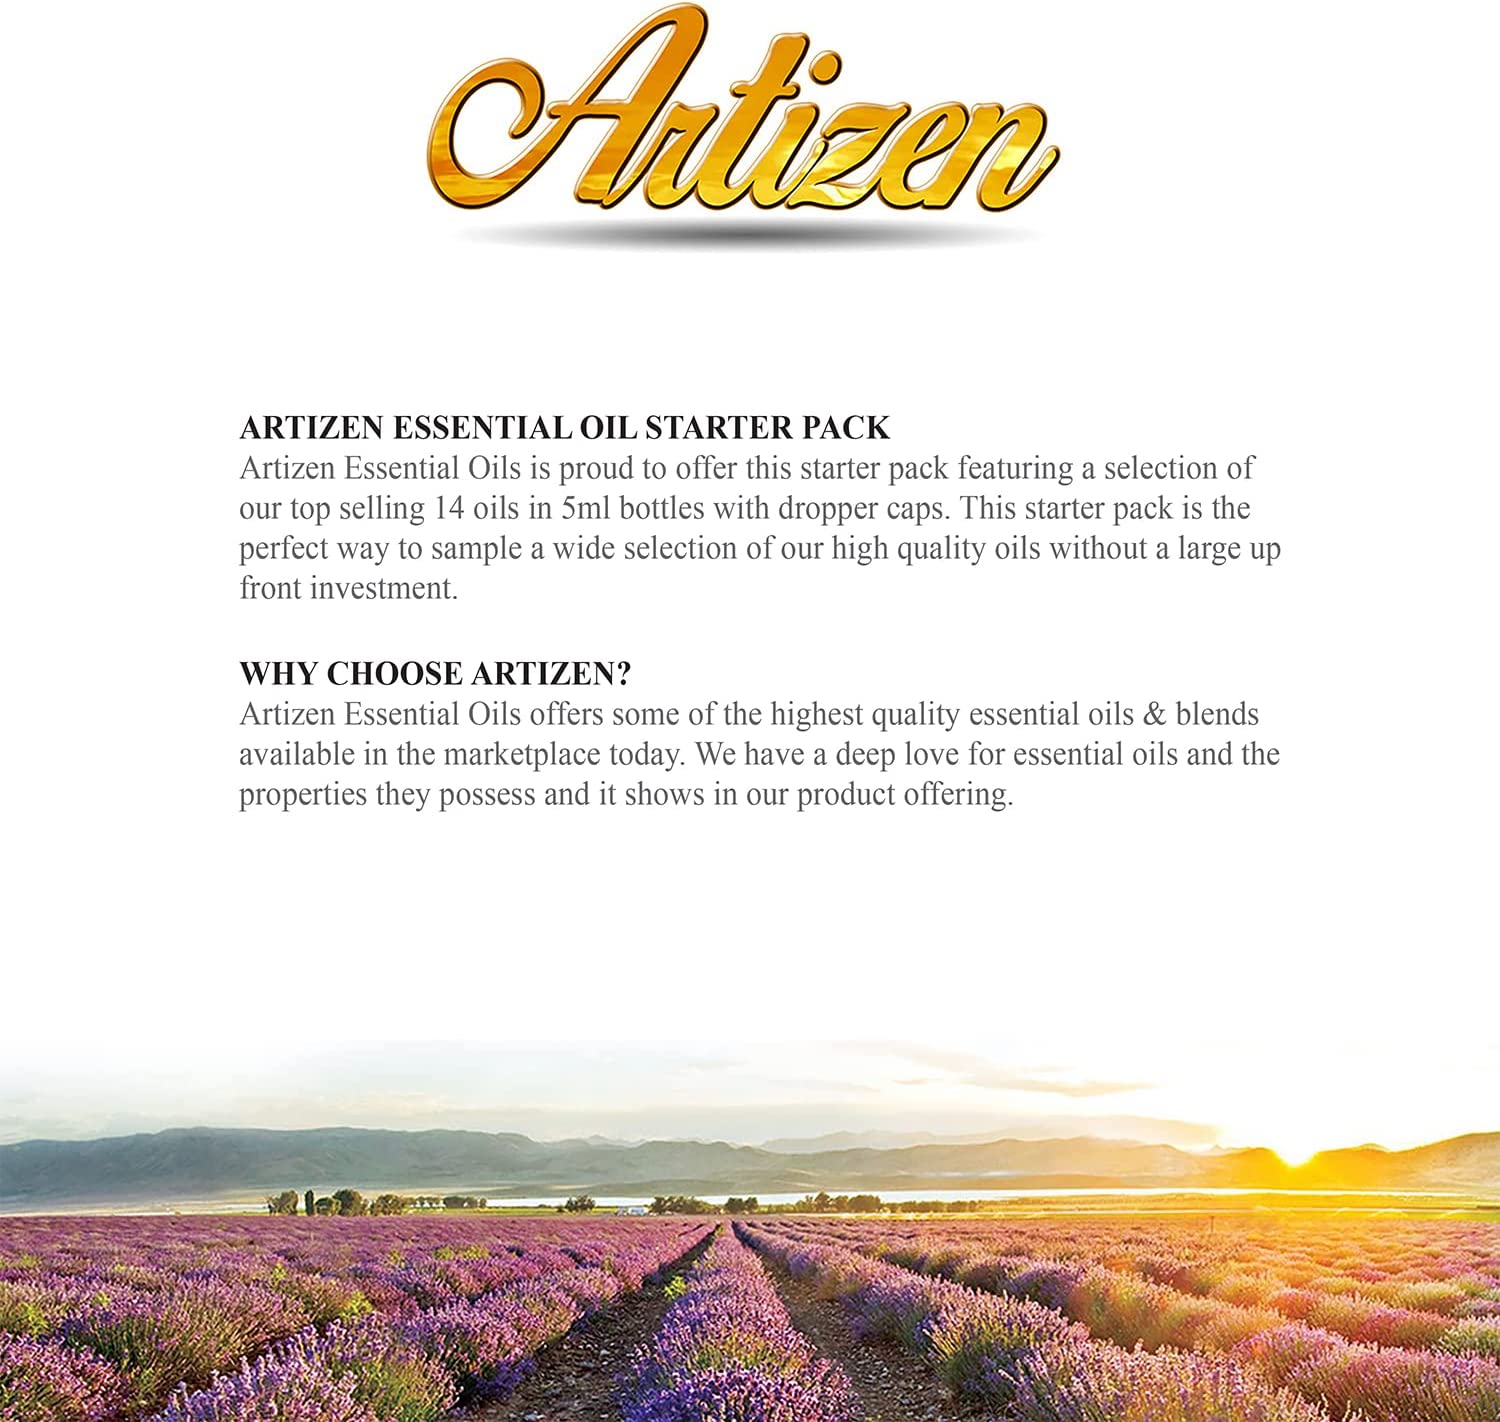 Artizen Top 14 Essential Oil Set for Diffuser, Aromatherapy and Candle Making - Fall Holiday Fragrance Scents with Lavender, Frankincense, Eucalyptus Oils and More - image 5 of 6